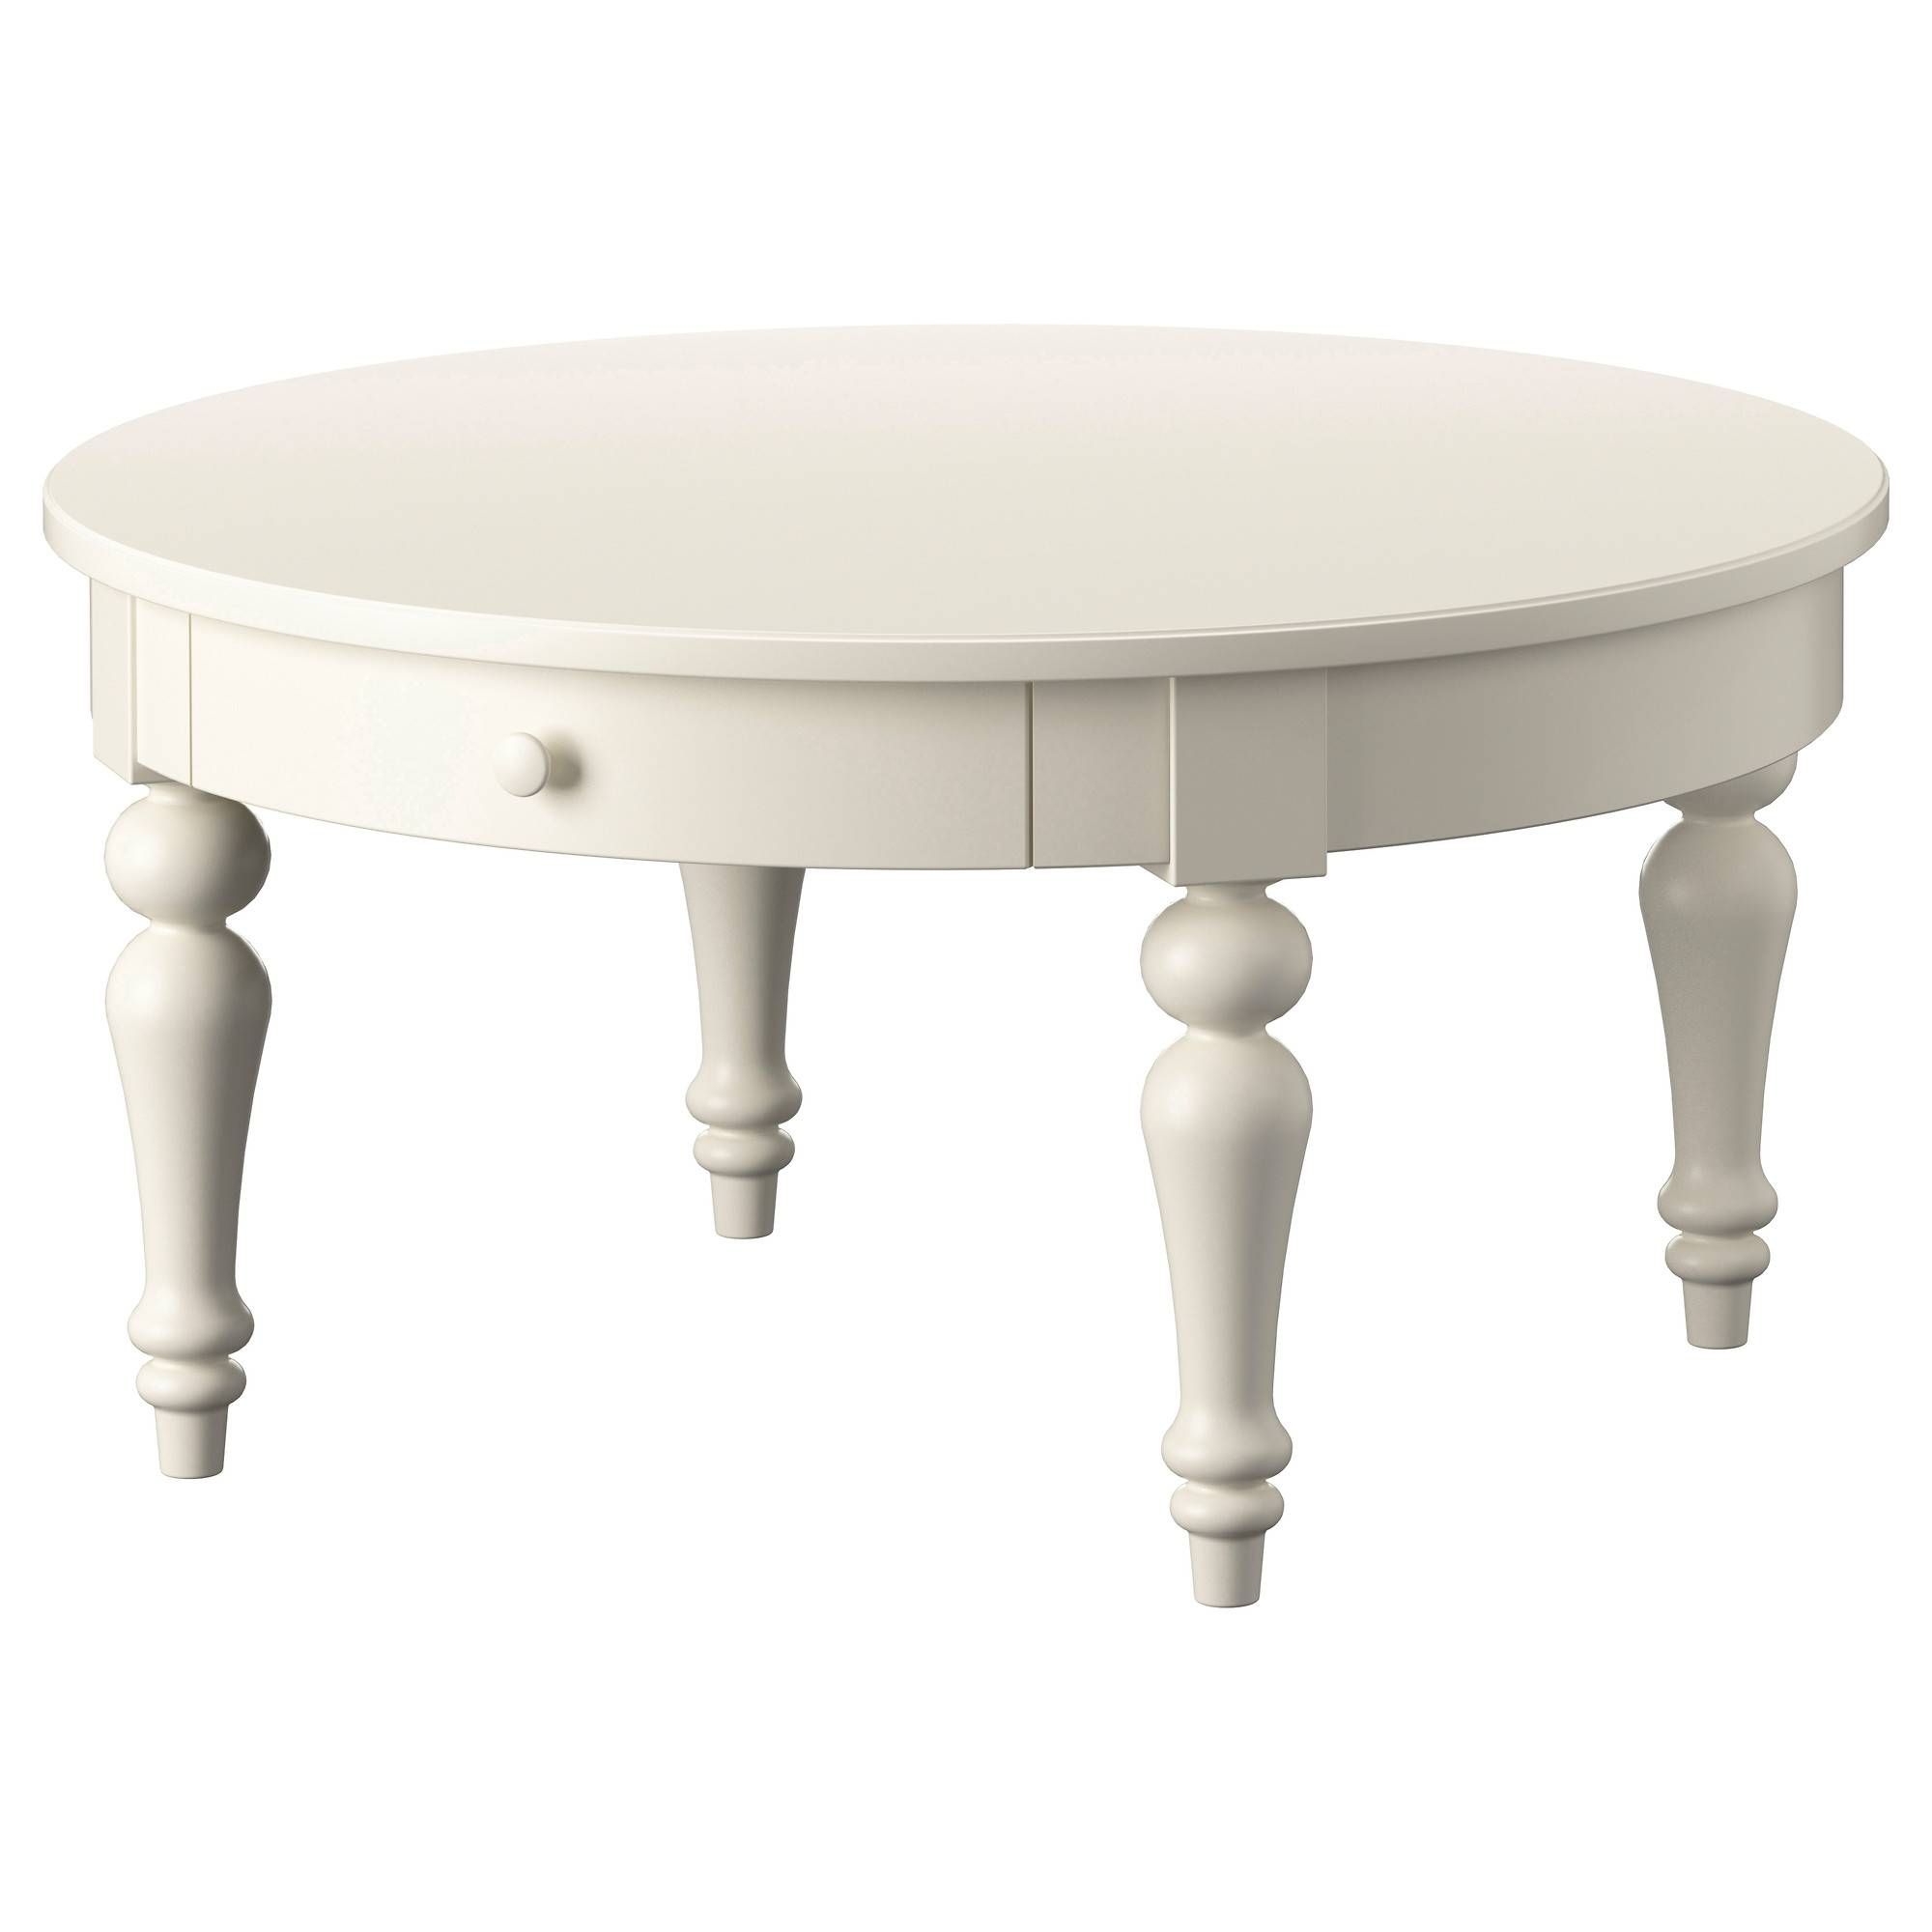 Round Coffee Table Antique White | Coffee Tables Decoration Pertaining To Round Coffee Tables With Drawers (View 12 of 30)